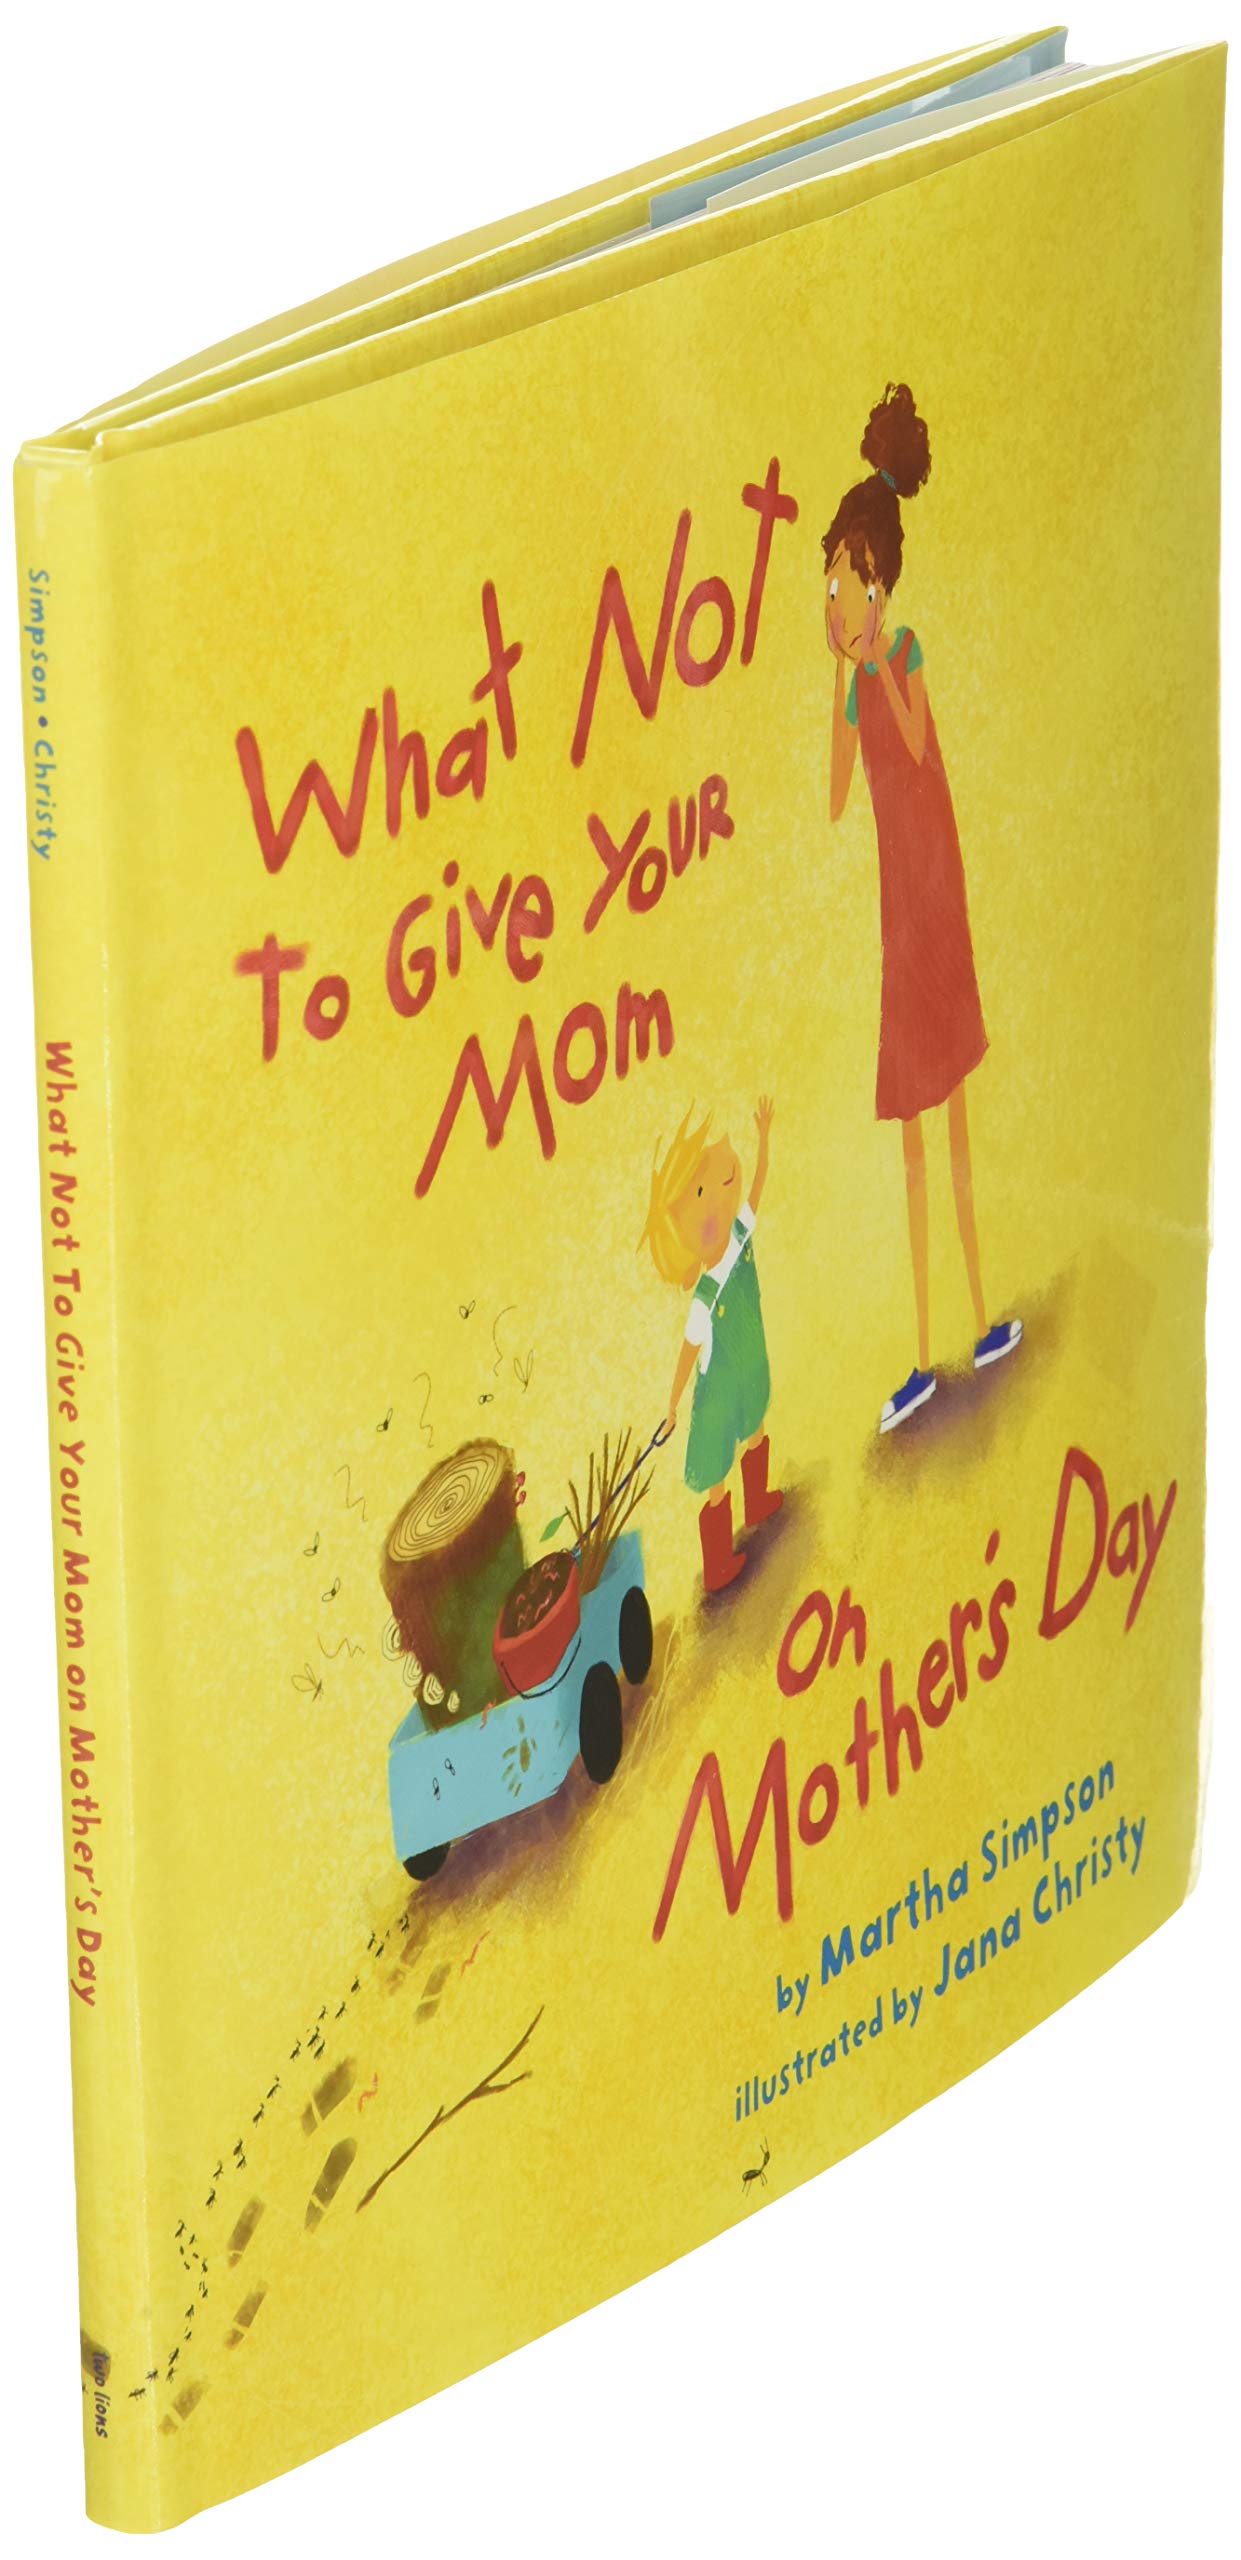 What NOT to Give Your Mom on Mother's Day